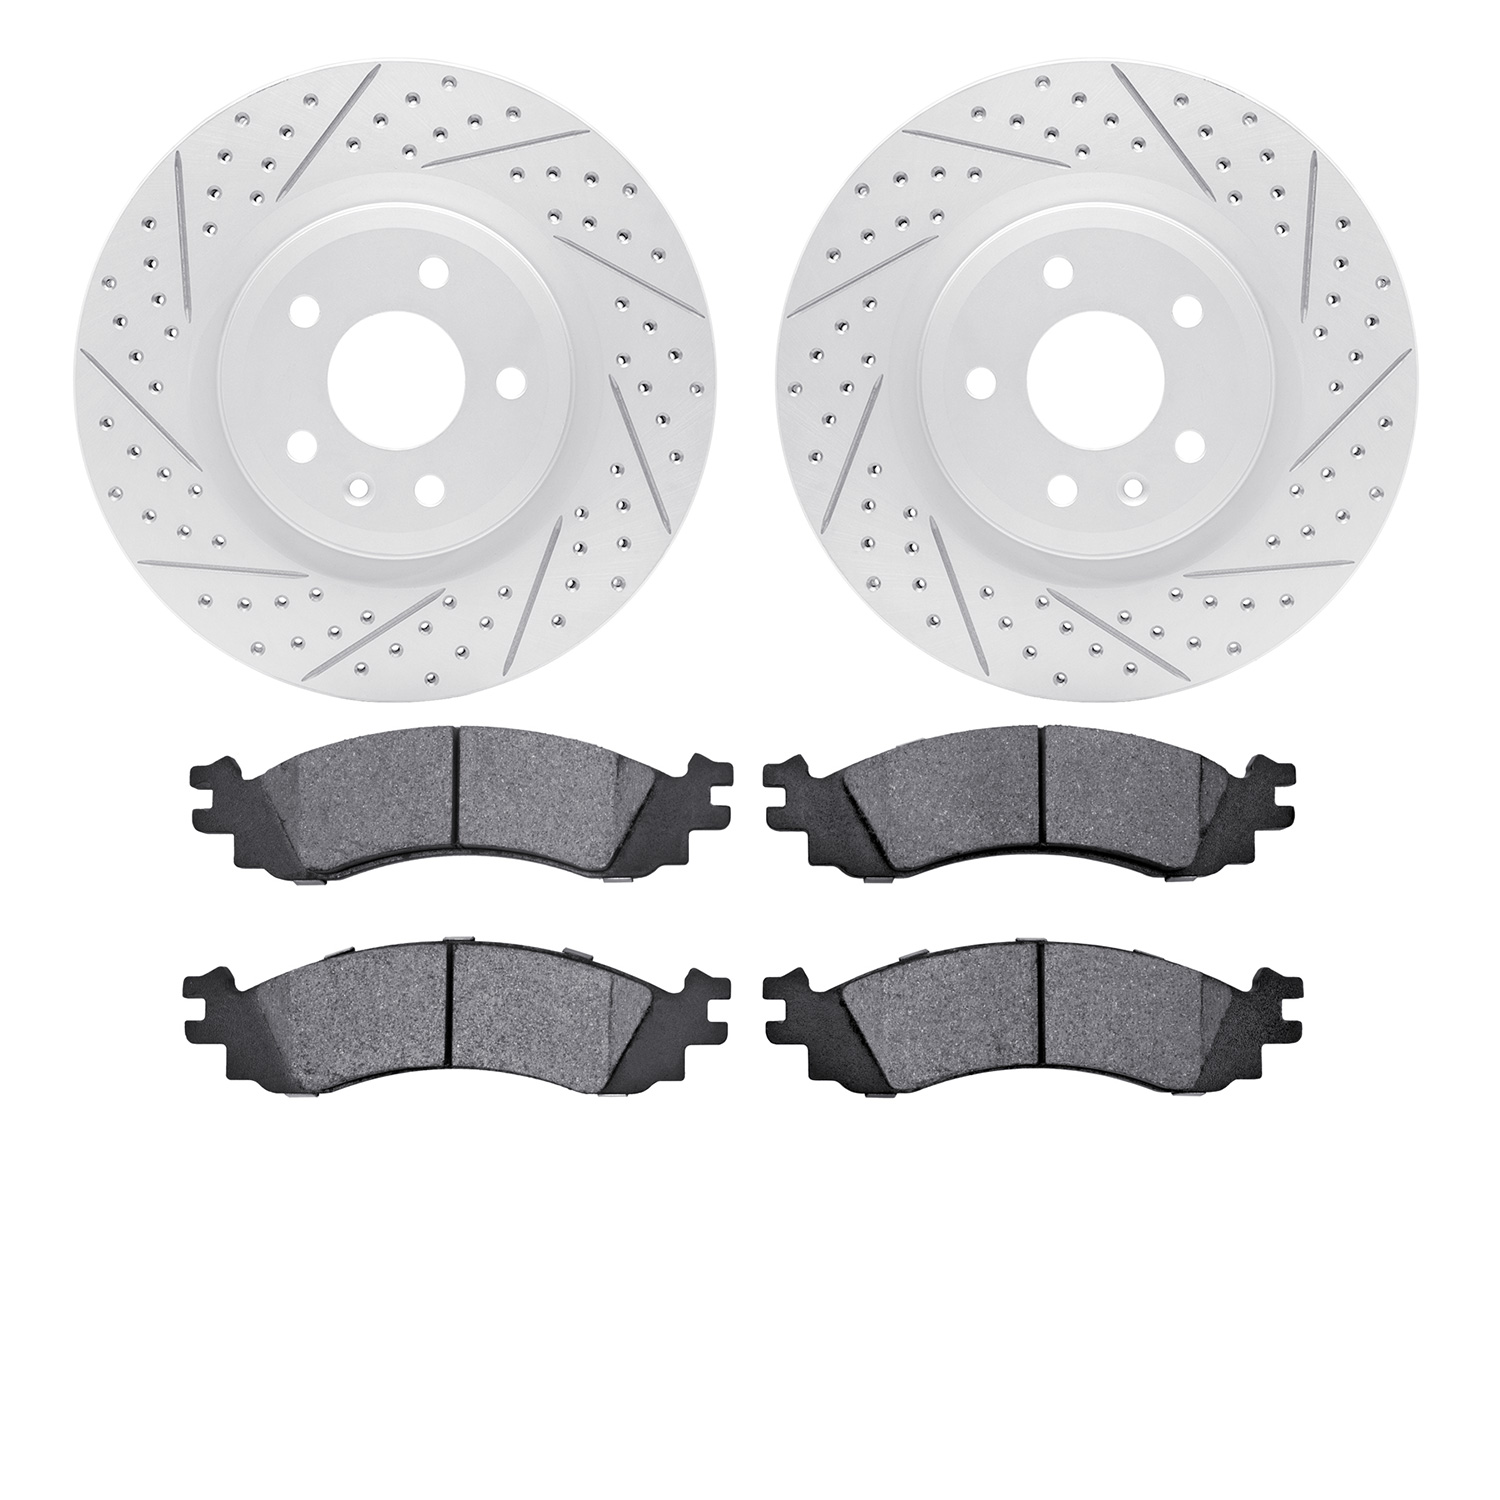 2502-54093 Geoperformance Drilled/Slotted Rotors w/5000 Advanced Brake Pads Kit, 2011-2012 Ford/Lincoln/Mercury/Mazda, Position: